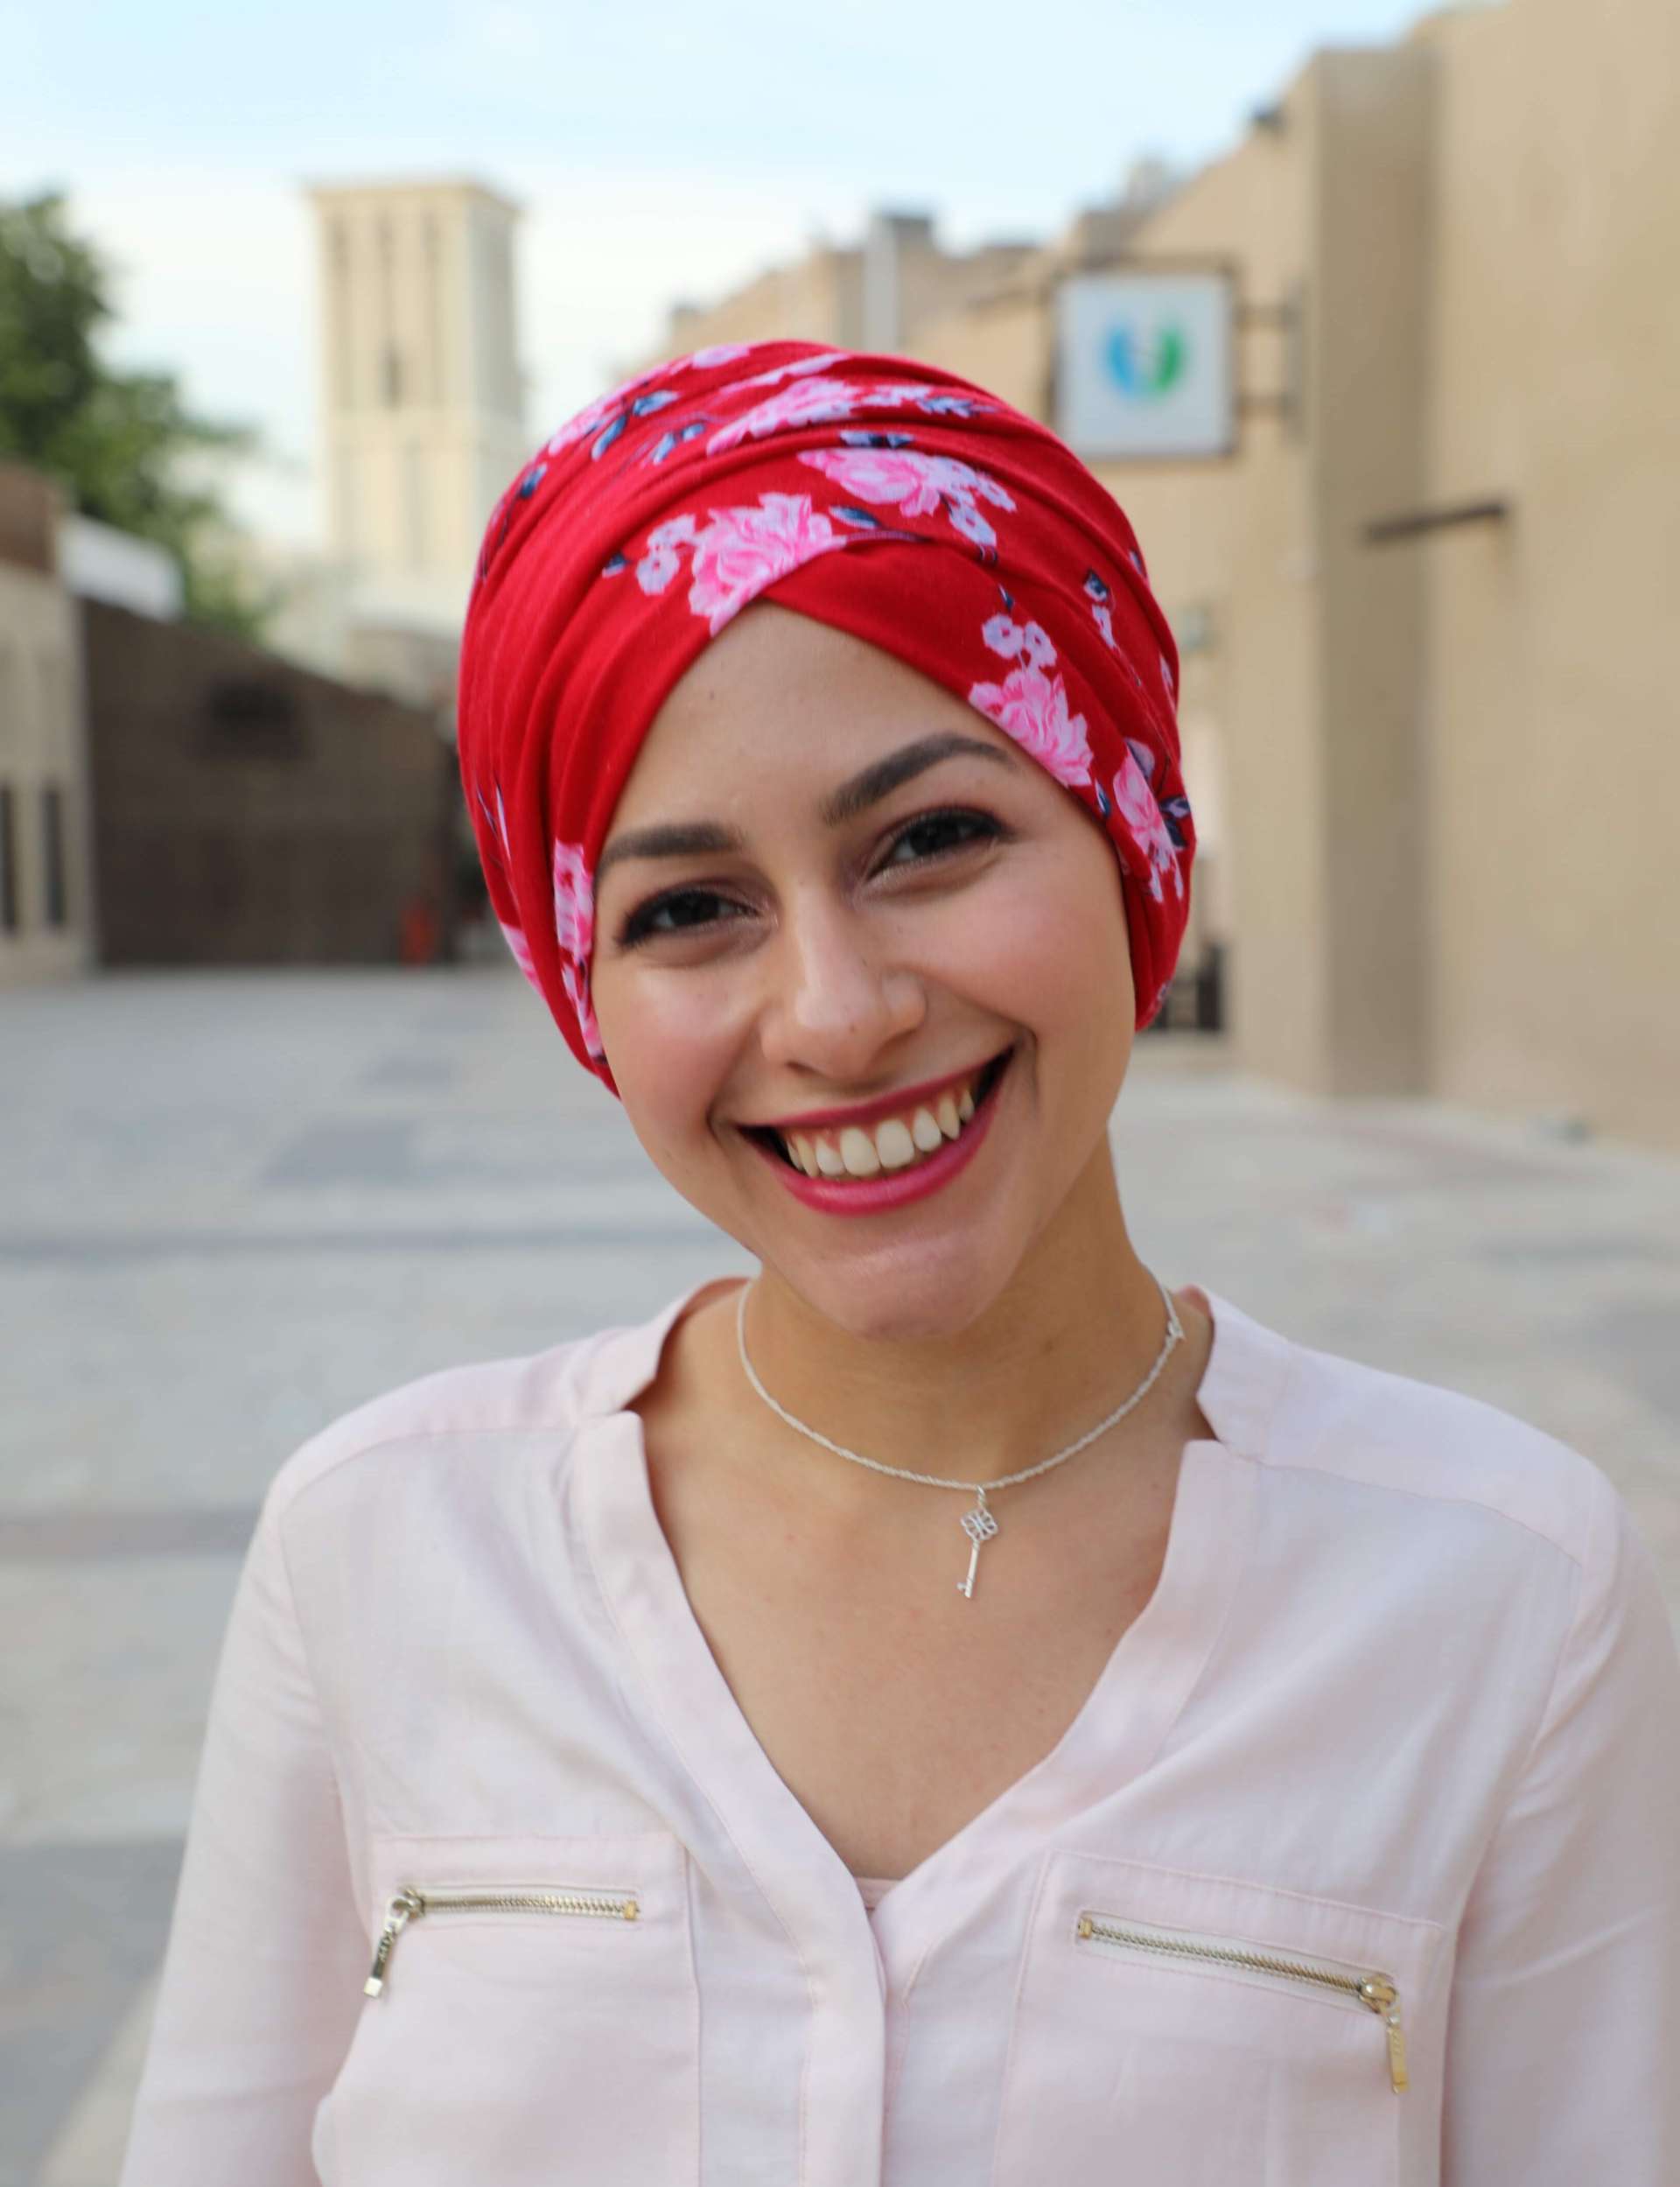 A headshot of Lur Alghurabi wearing a white long sleeved shirt, silver necklace, red lipstick and a red scarf with pink flowers wrapped around her head. She is smiling at the camera and the background is of a blurry outside setting.